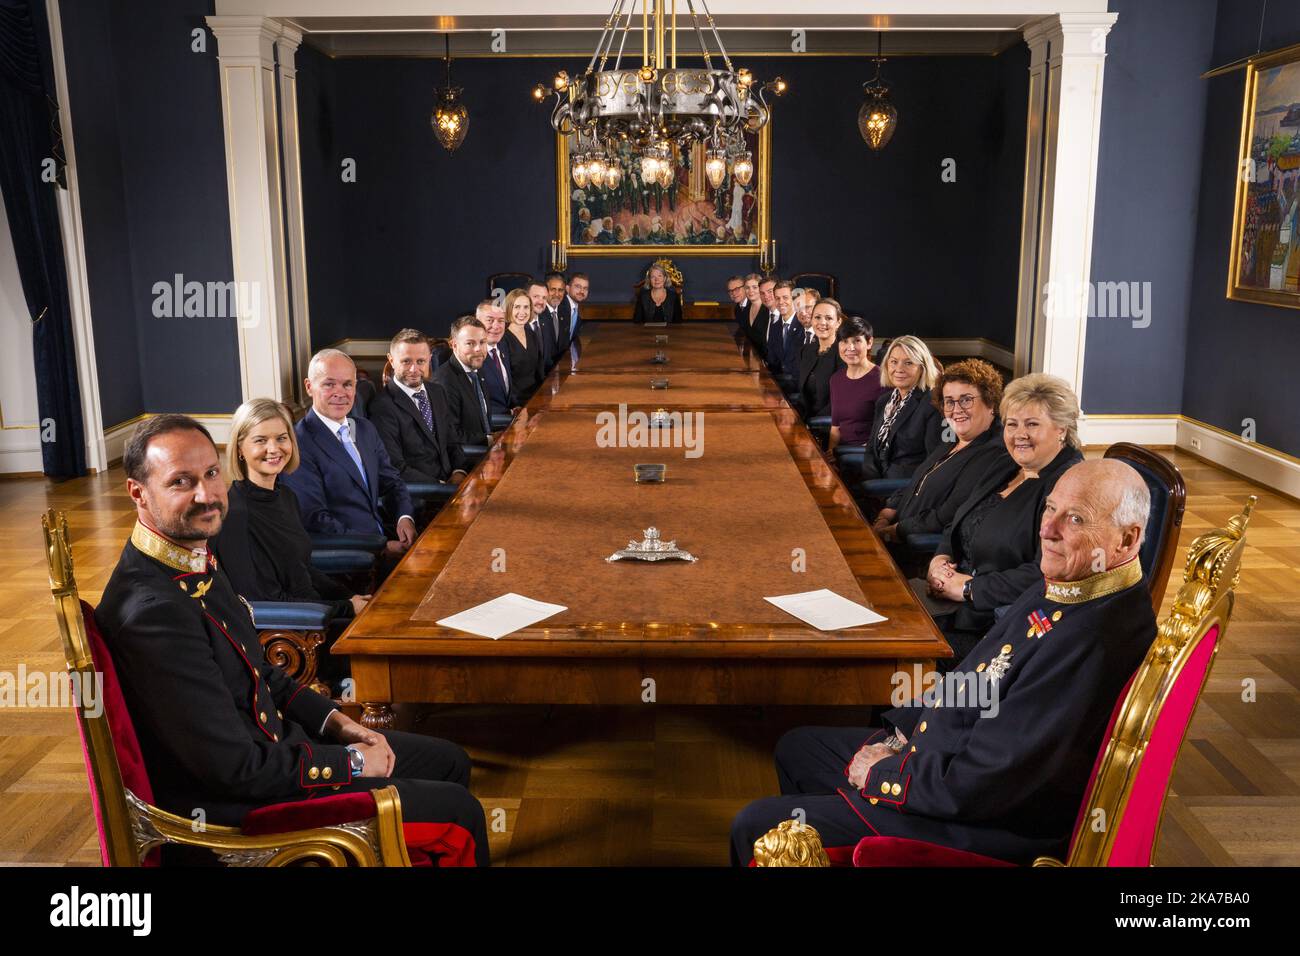 Oslo 20211014. The Solberg government meets the king for its last minister at the Palace on Thursday. Under the Prime Minister, the outgoing government appoints the ministers to the incoming government. F.v. and around the table: Crown Prince Haakon, Minister of Education and Integration Guri Melby (V), Minister of Finance Jan Tore Sanner (H), Minister of Health Bent Hoie (H), Minister of Labor and Social Affairs TorbjÃ¸rn Roe Isaksen (H), Minister of Defense Frank Bakke-Jensen (H ), Minister of Trade and Industry Iselin Nybo (V), Minister of Development Dag Inge Ulstein (KrF), Minister of Cu Stock Photo